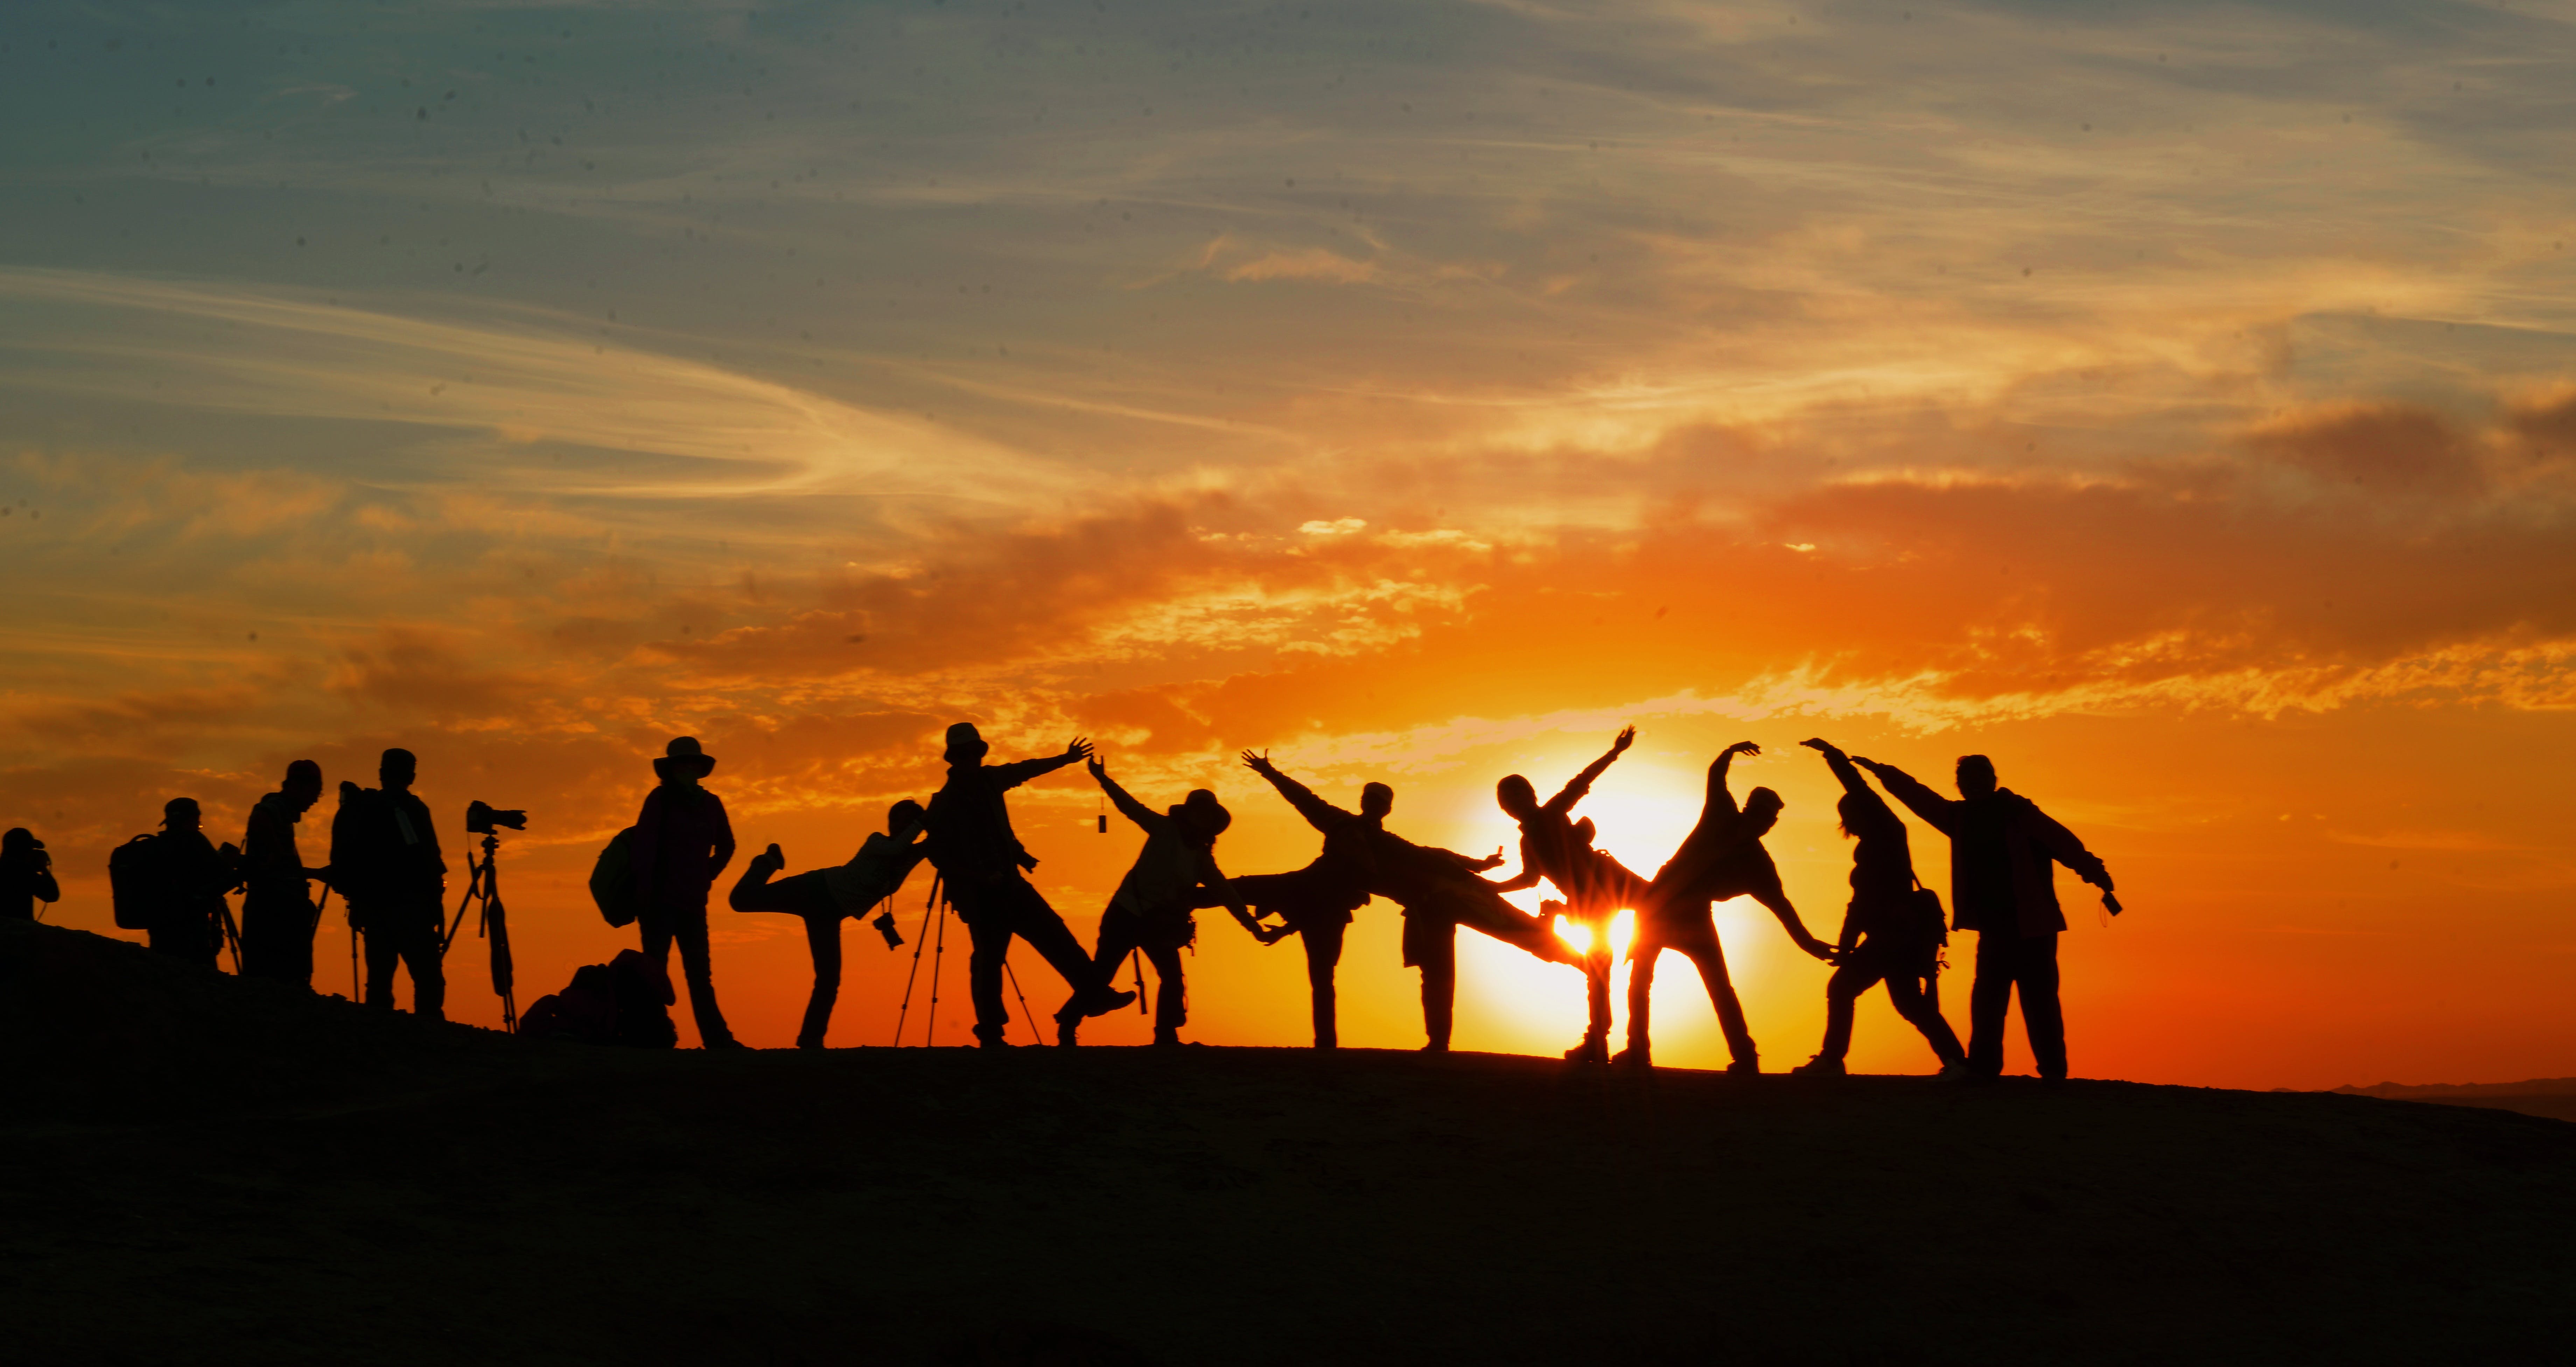 Silhouettes of people dancing, playing against the sunset